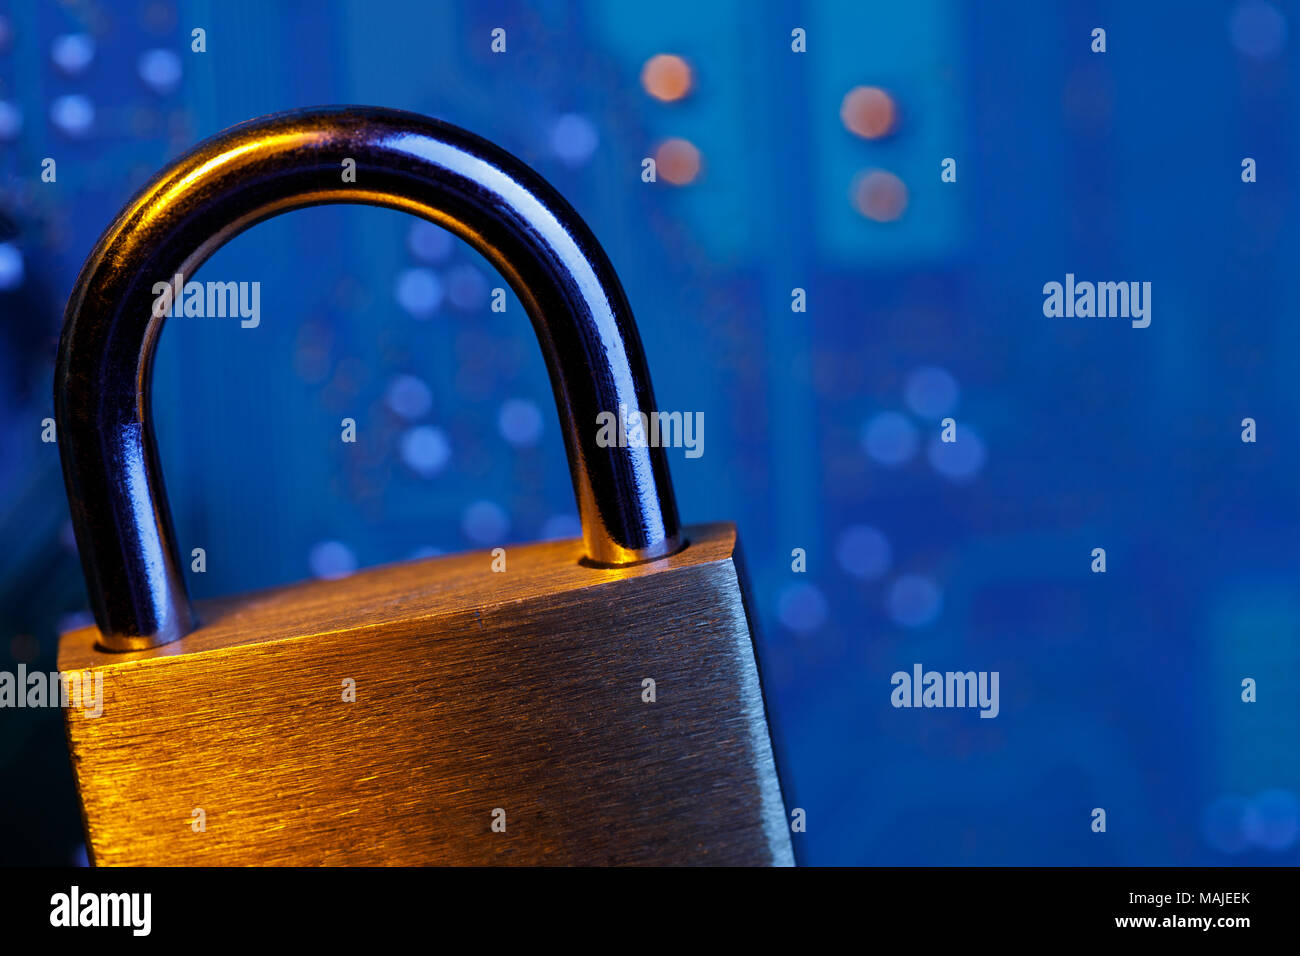 Digital security concept with space for text. Closed lock against the chip background Stock Photo